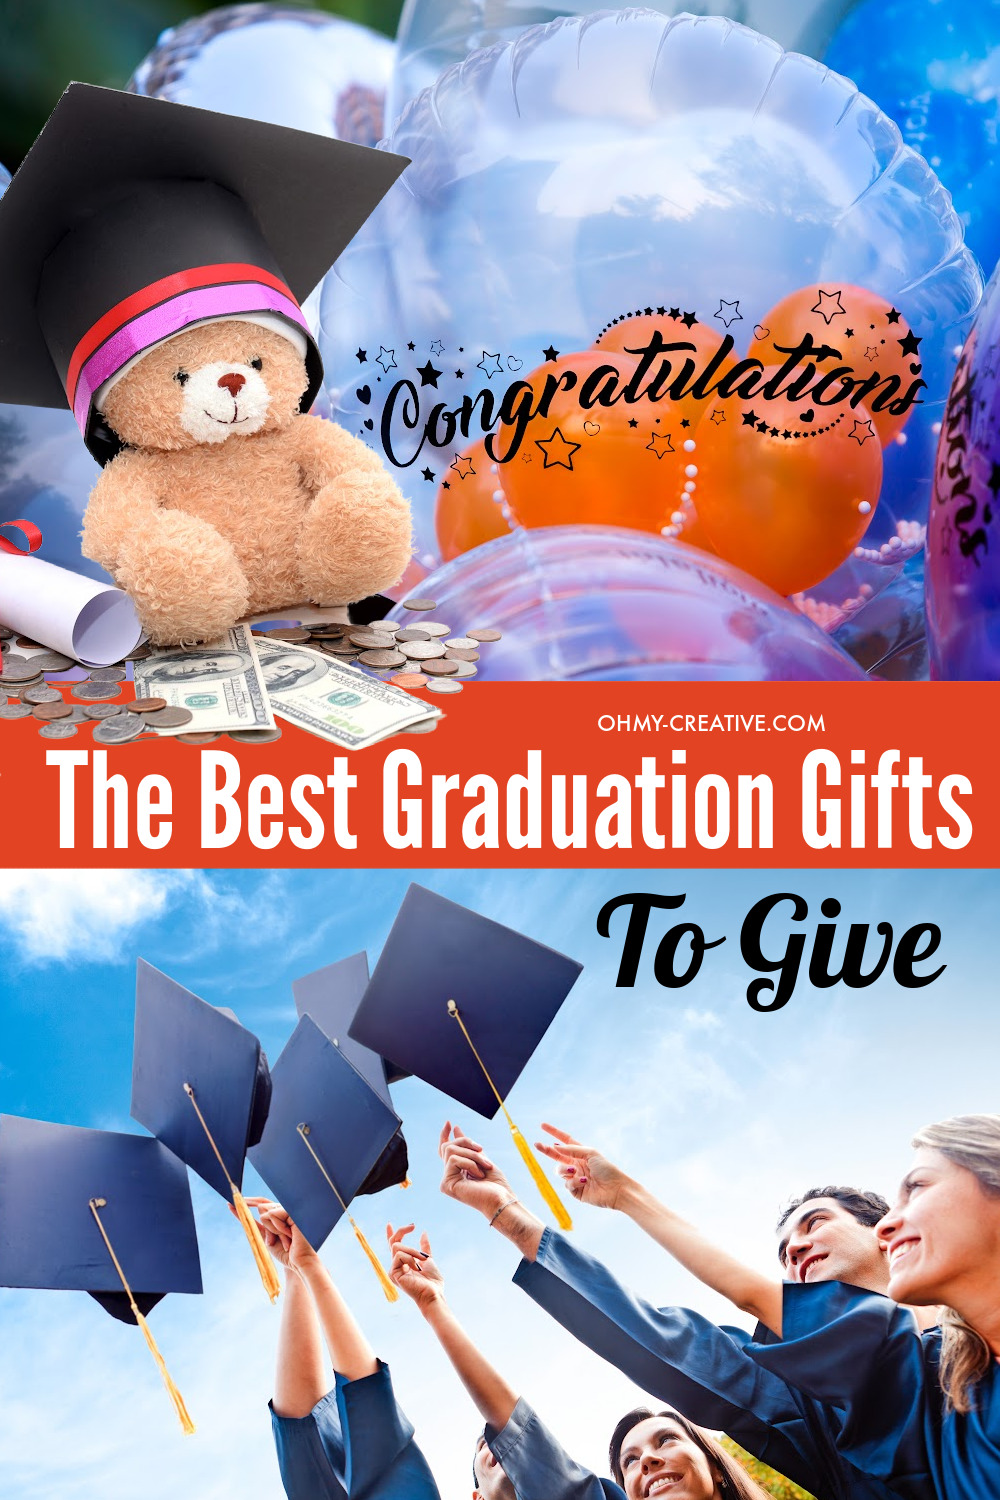 A collage of graduation gift ideas while a group of grads throw graduation caps in the air celebrating graduation!